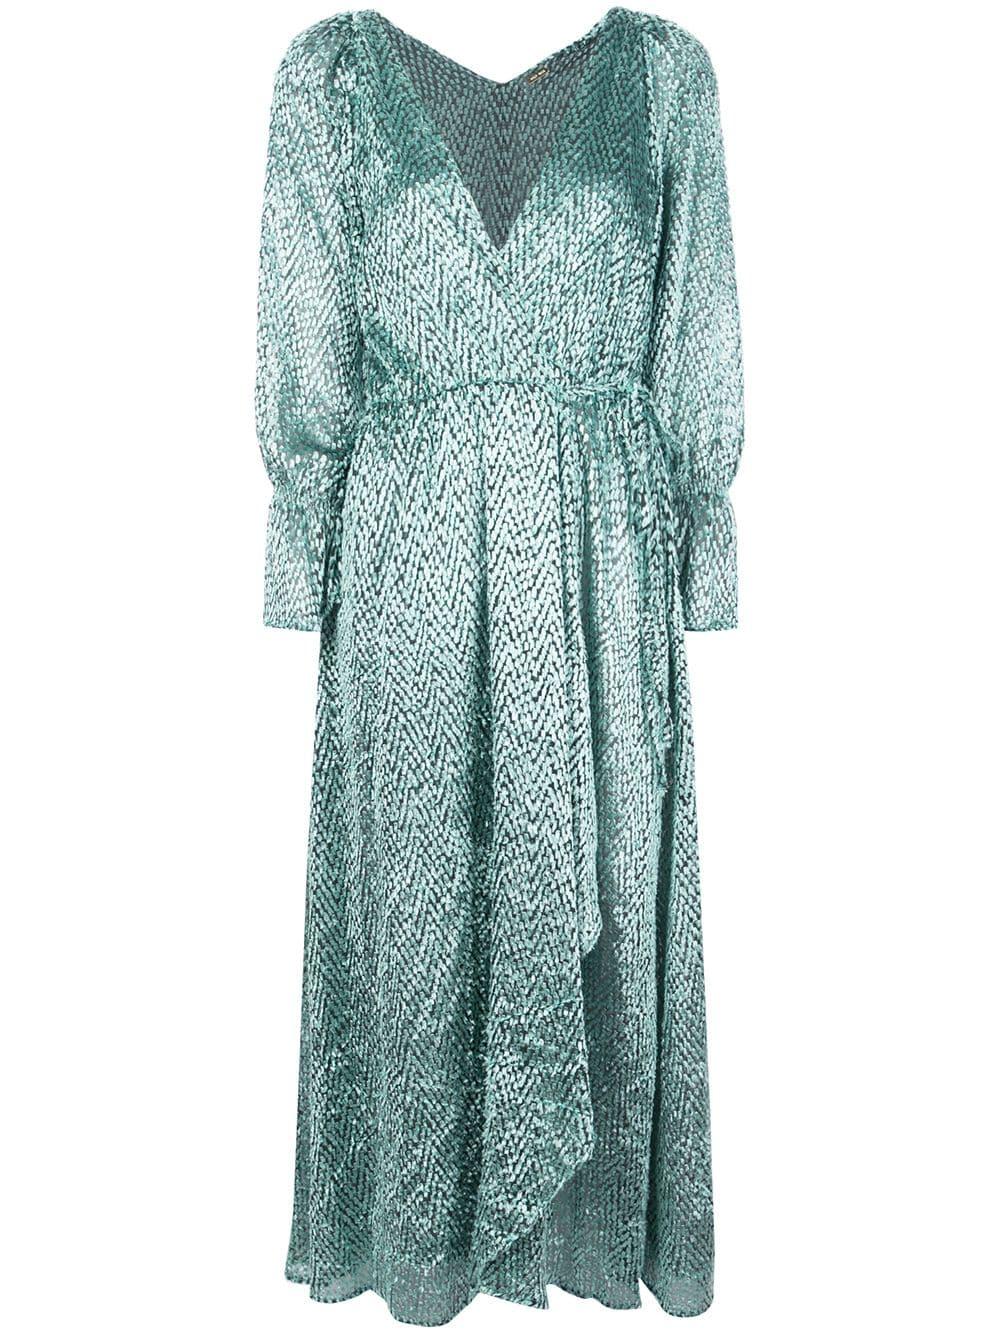 Cult Gaia Synthetic Oona Dress in Green - Lyst